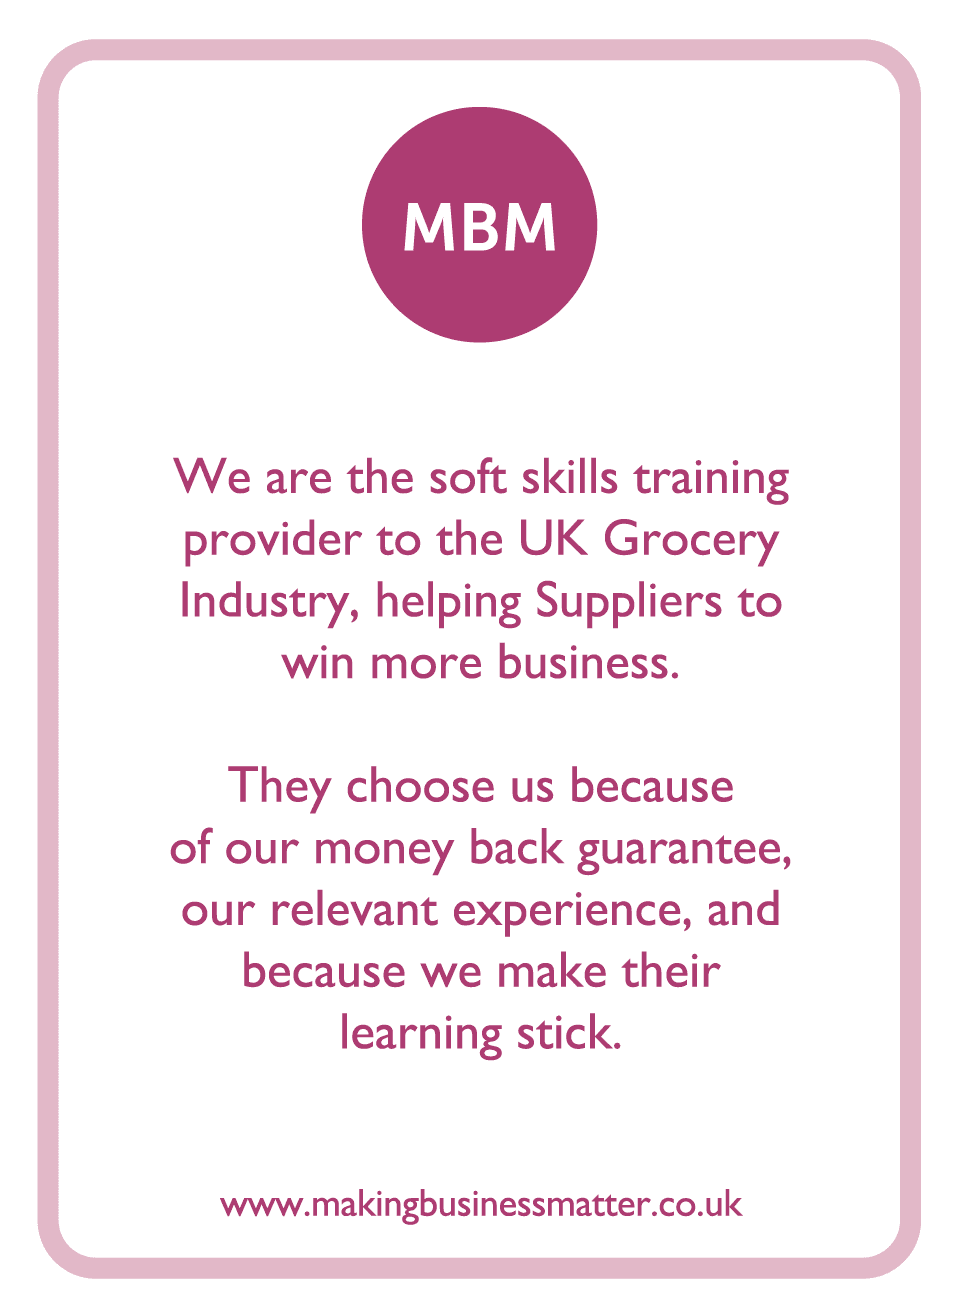 Coaching card with MBM brand info